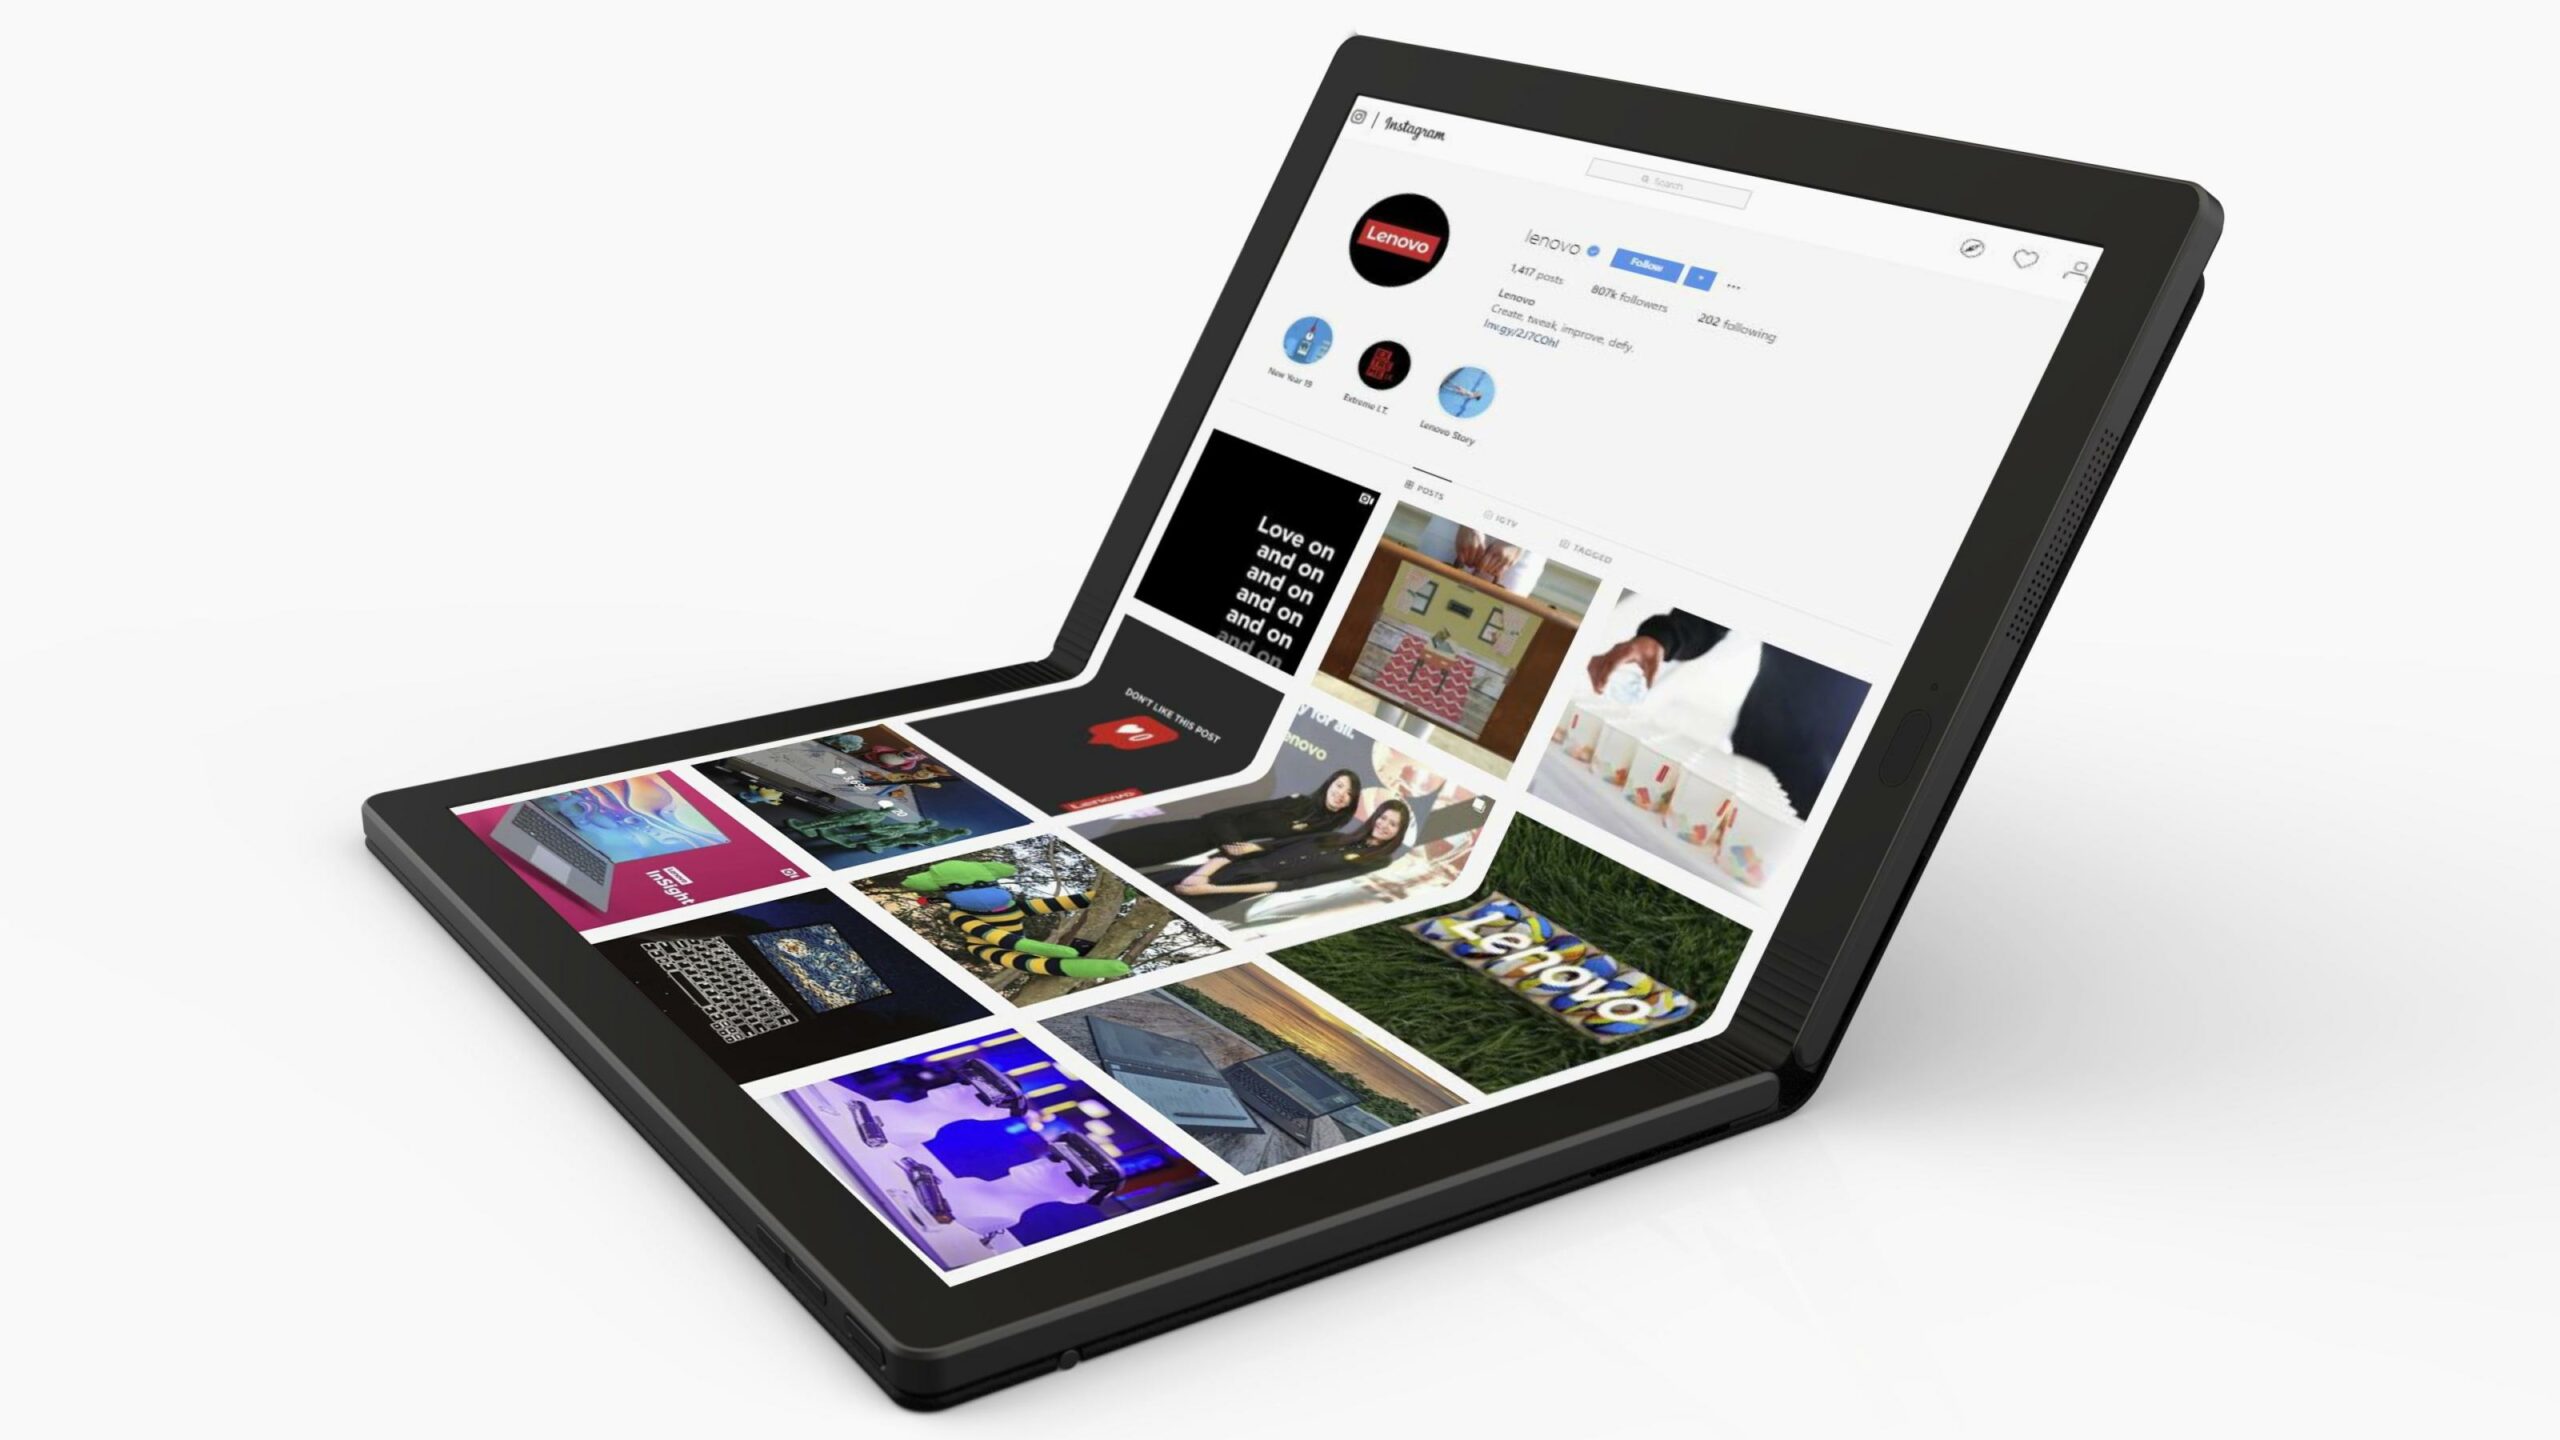 Lenovo built a laptop with a folding screen and it could be the future of portable PCs